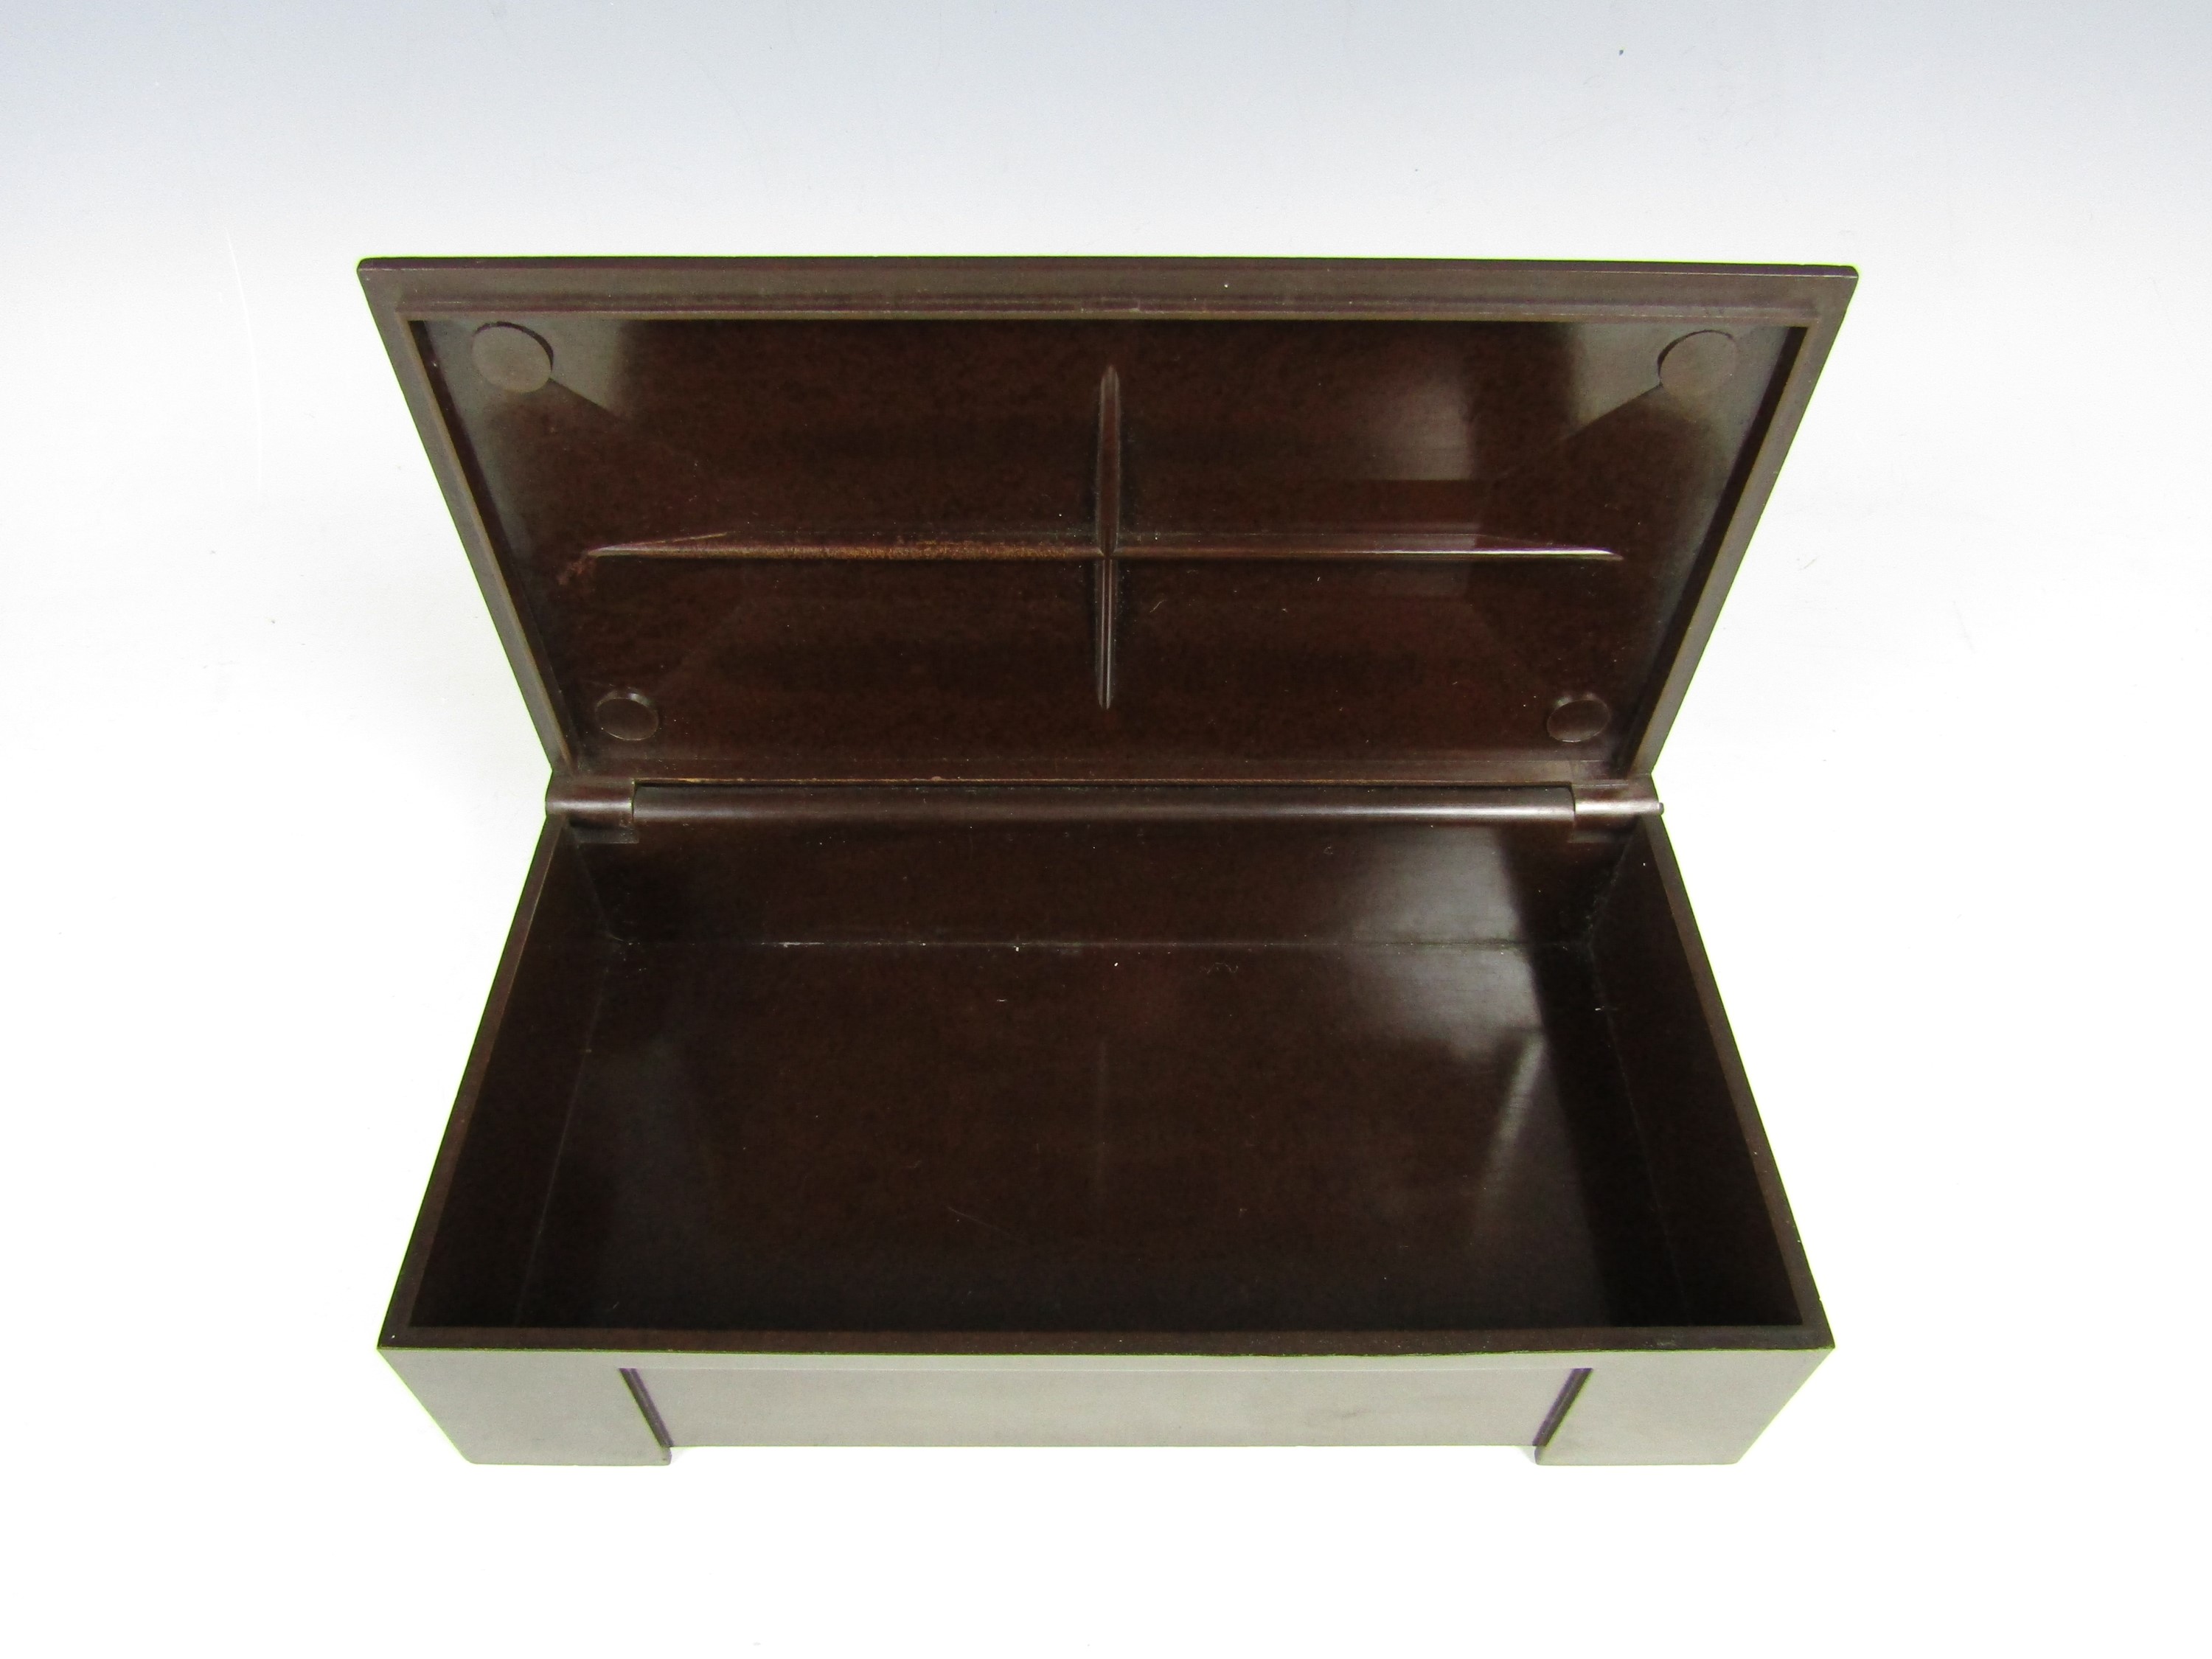 A vintage State Express Bakelite table cigarette box - Image 2 of 2